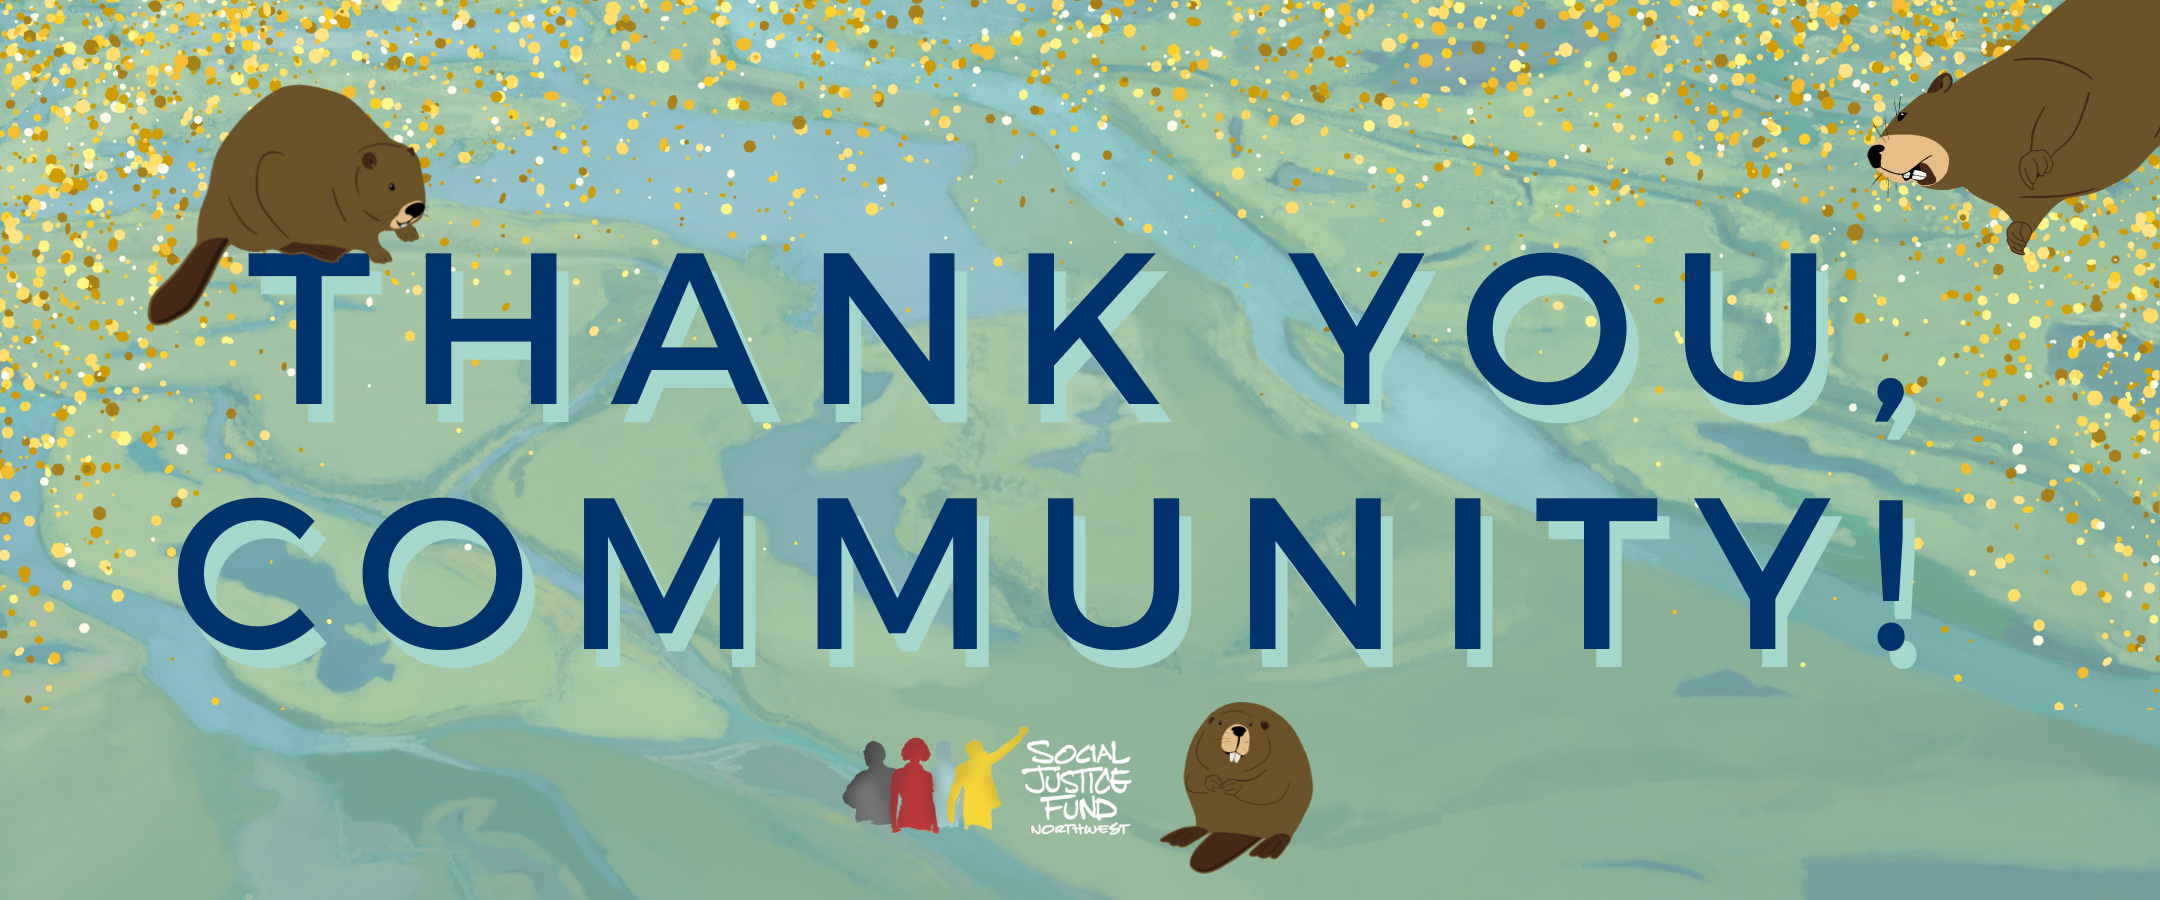 Rectangular banner image. Background is a light blue tinted illustration of an estuary with three cartoon beavers playfully positioned around the edges. Golden confetti falls from the top. Text reads Thank you community